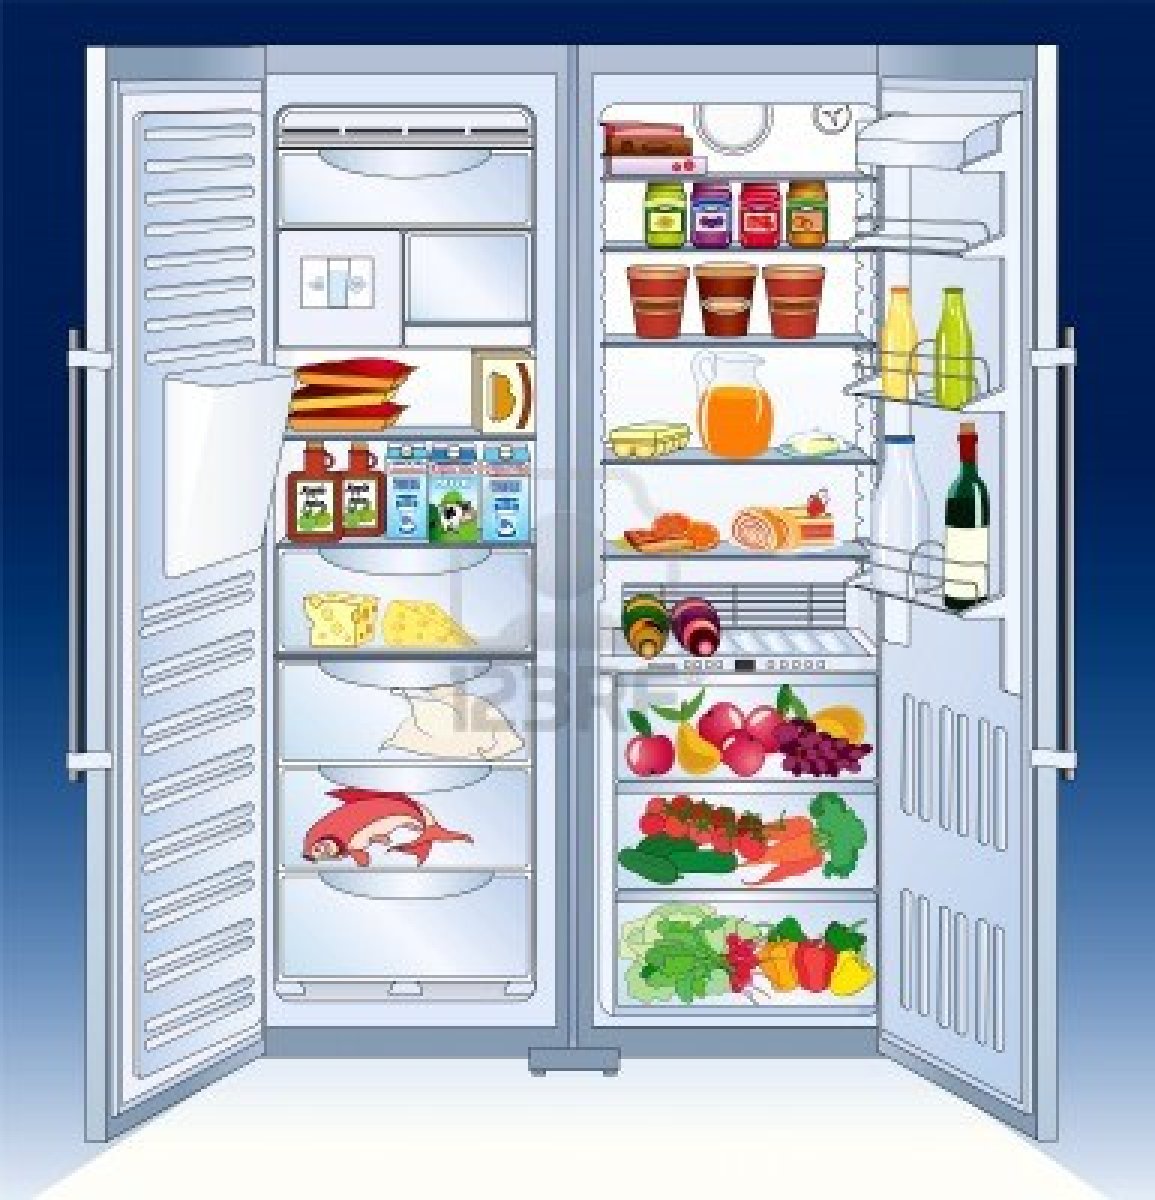 cleaning fridge clipart - photo #38